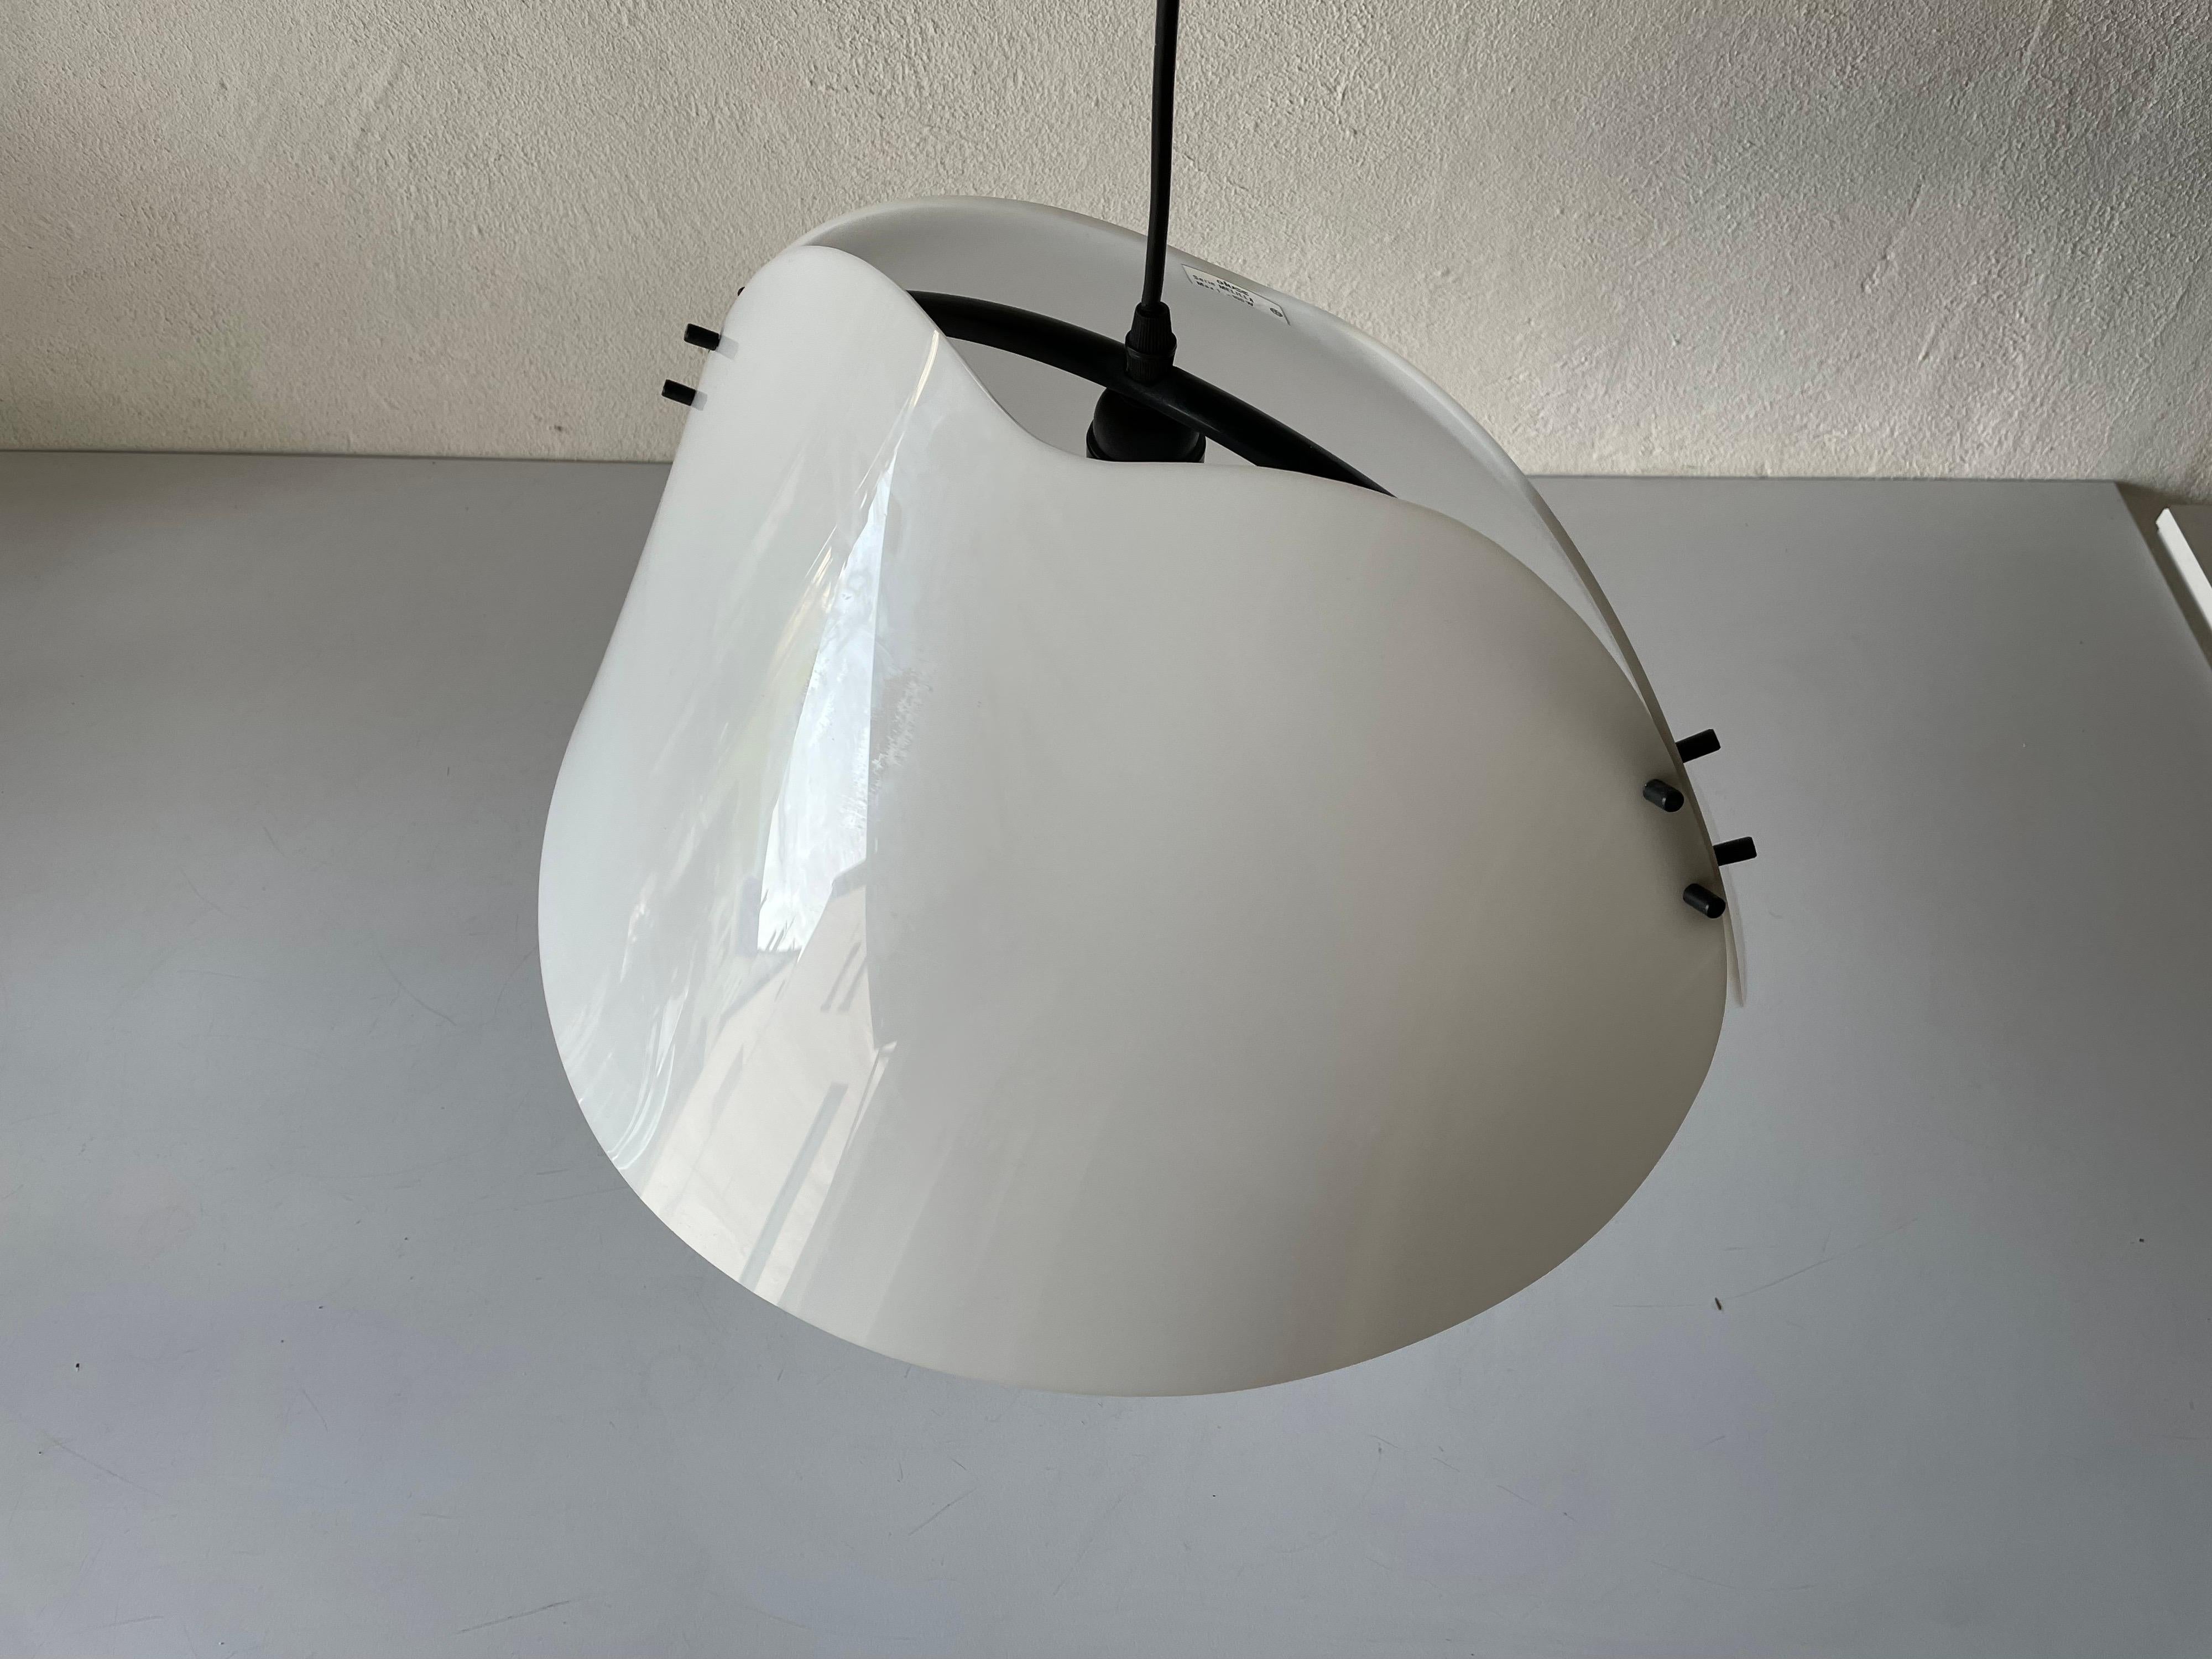 Plexiglass pendant lamp model Melilla by Oluce, 1970s, Italy

Elegant and minimal design hanging lamp
The black piece that connects the two parts is made of metal.

Lampshade is in good condition and very clean. 
This lamp works with E27 light